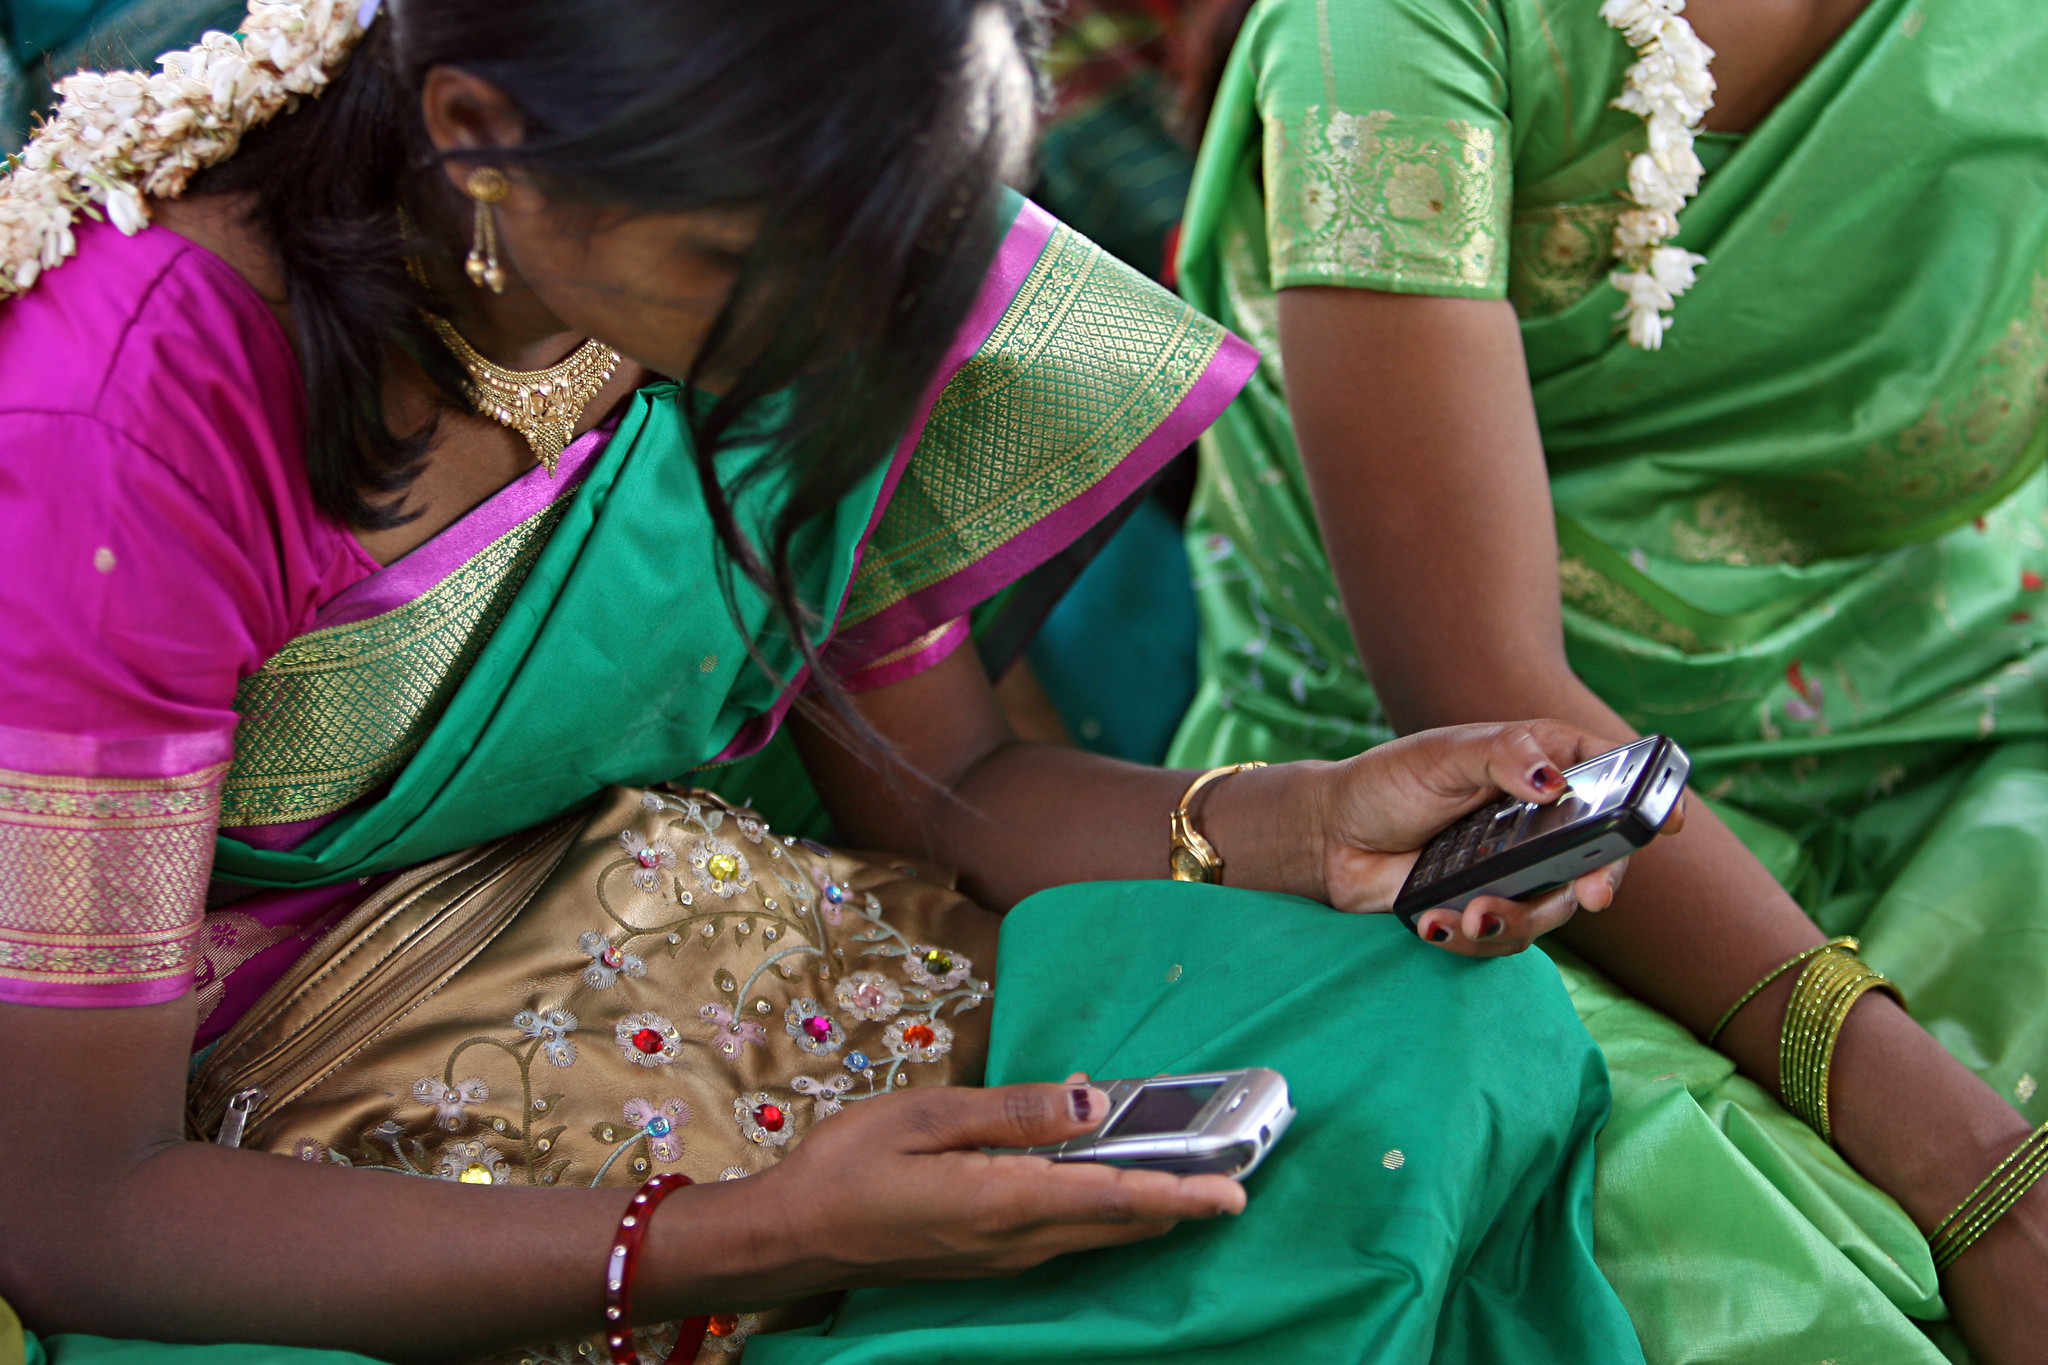 Young women look at their cellphone during a community meeting.